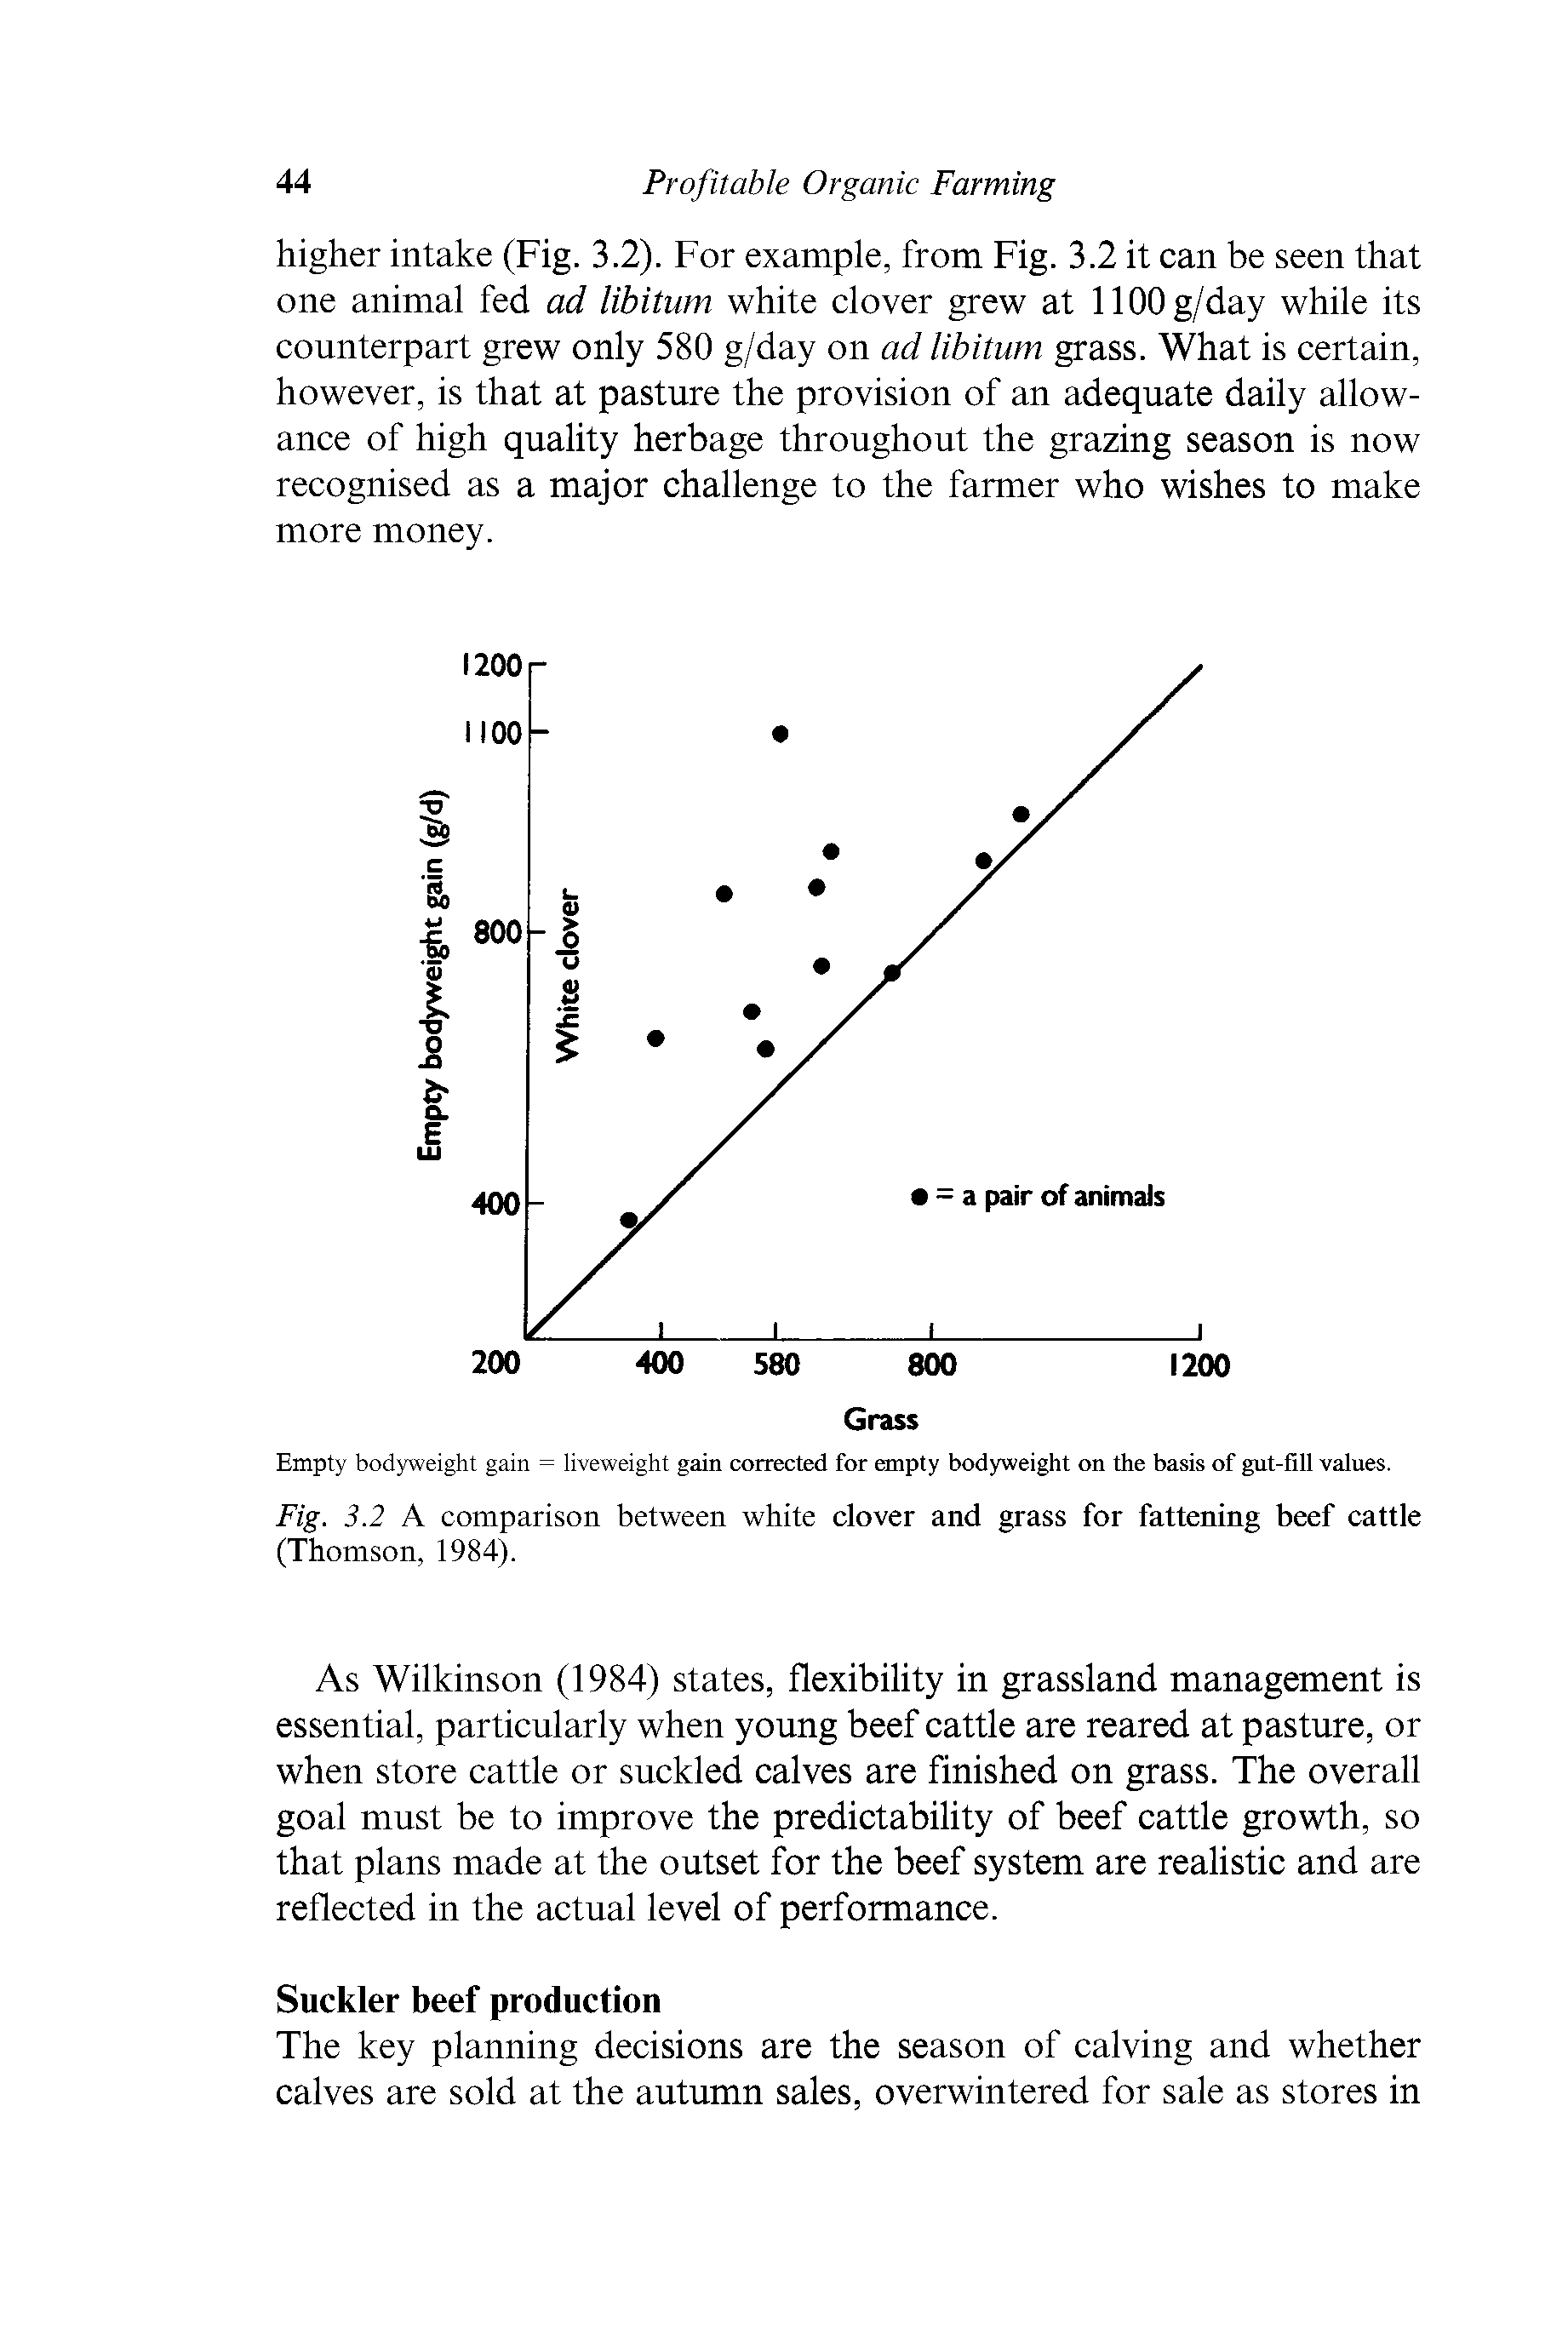 Fig. 3.2 A comparison between white clover and grass for fattening beef cattle (Thomson, 1984).